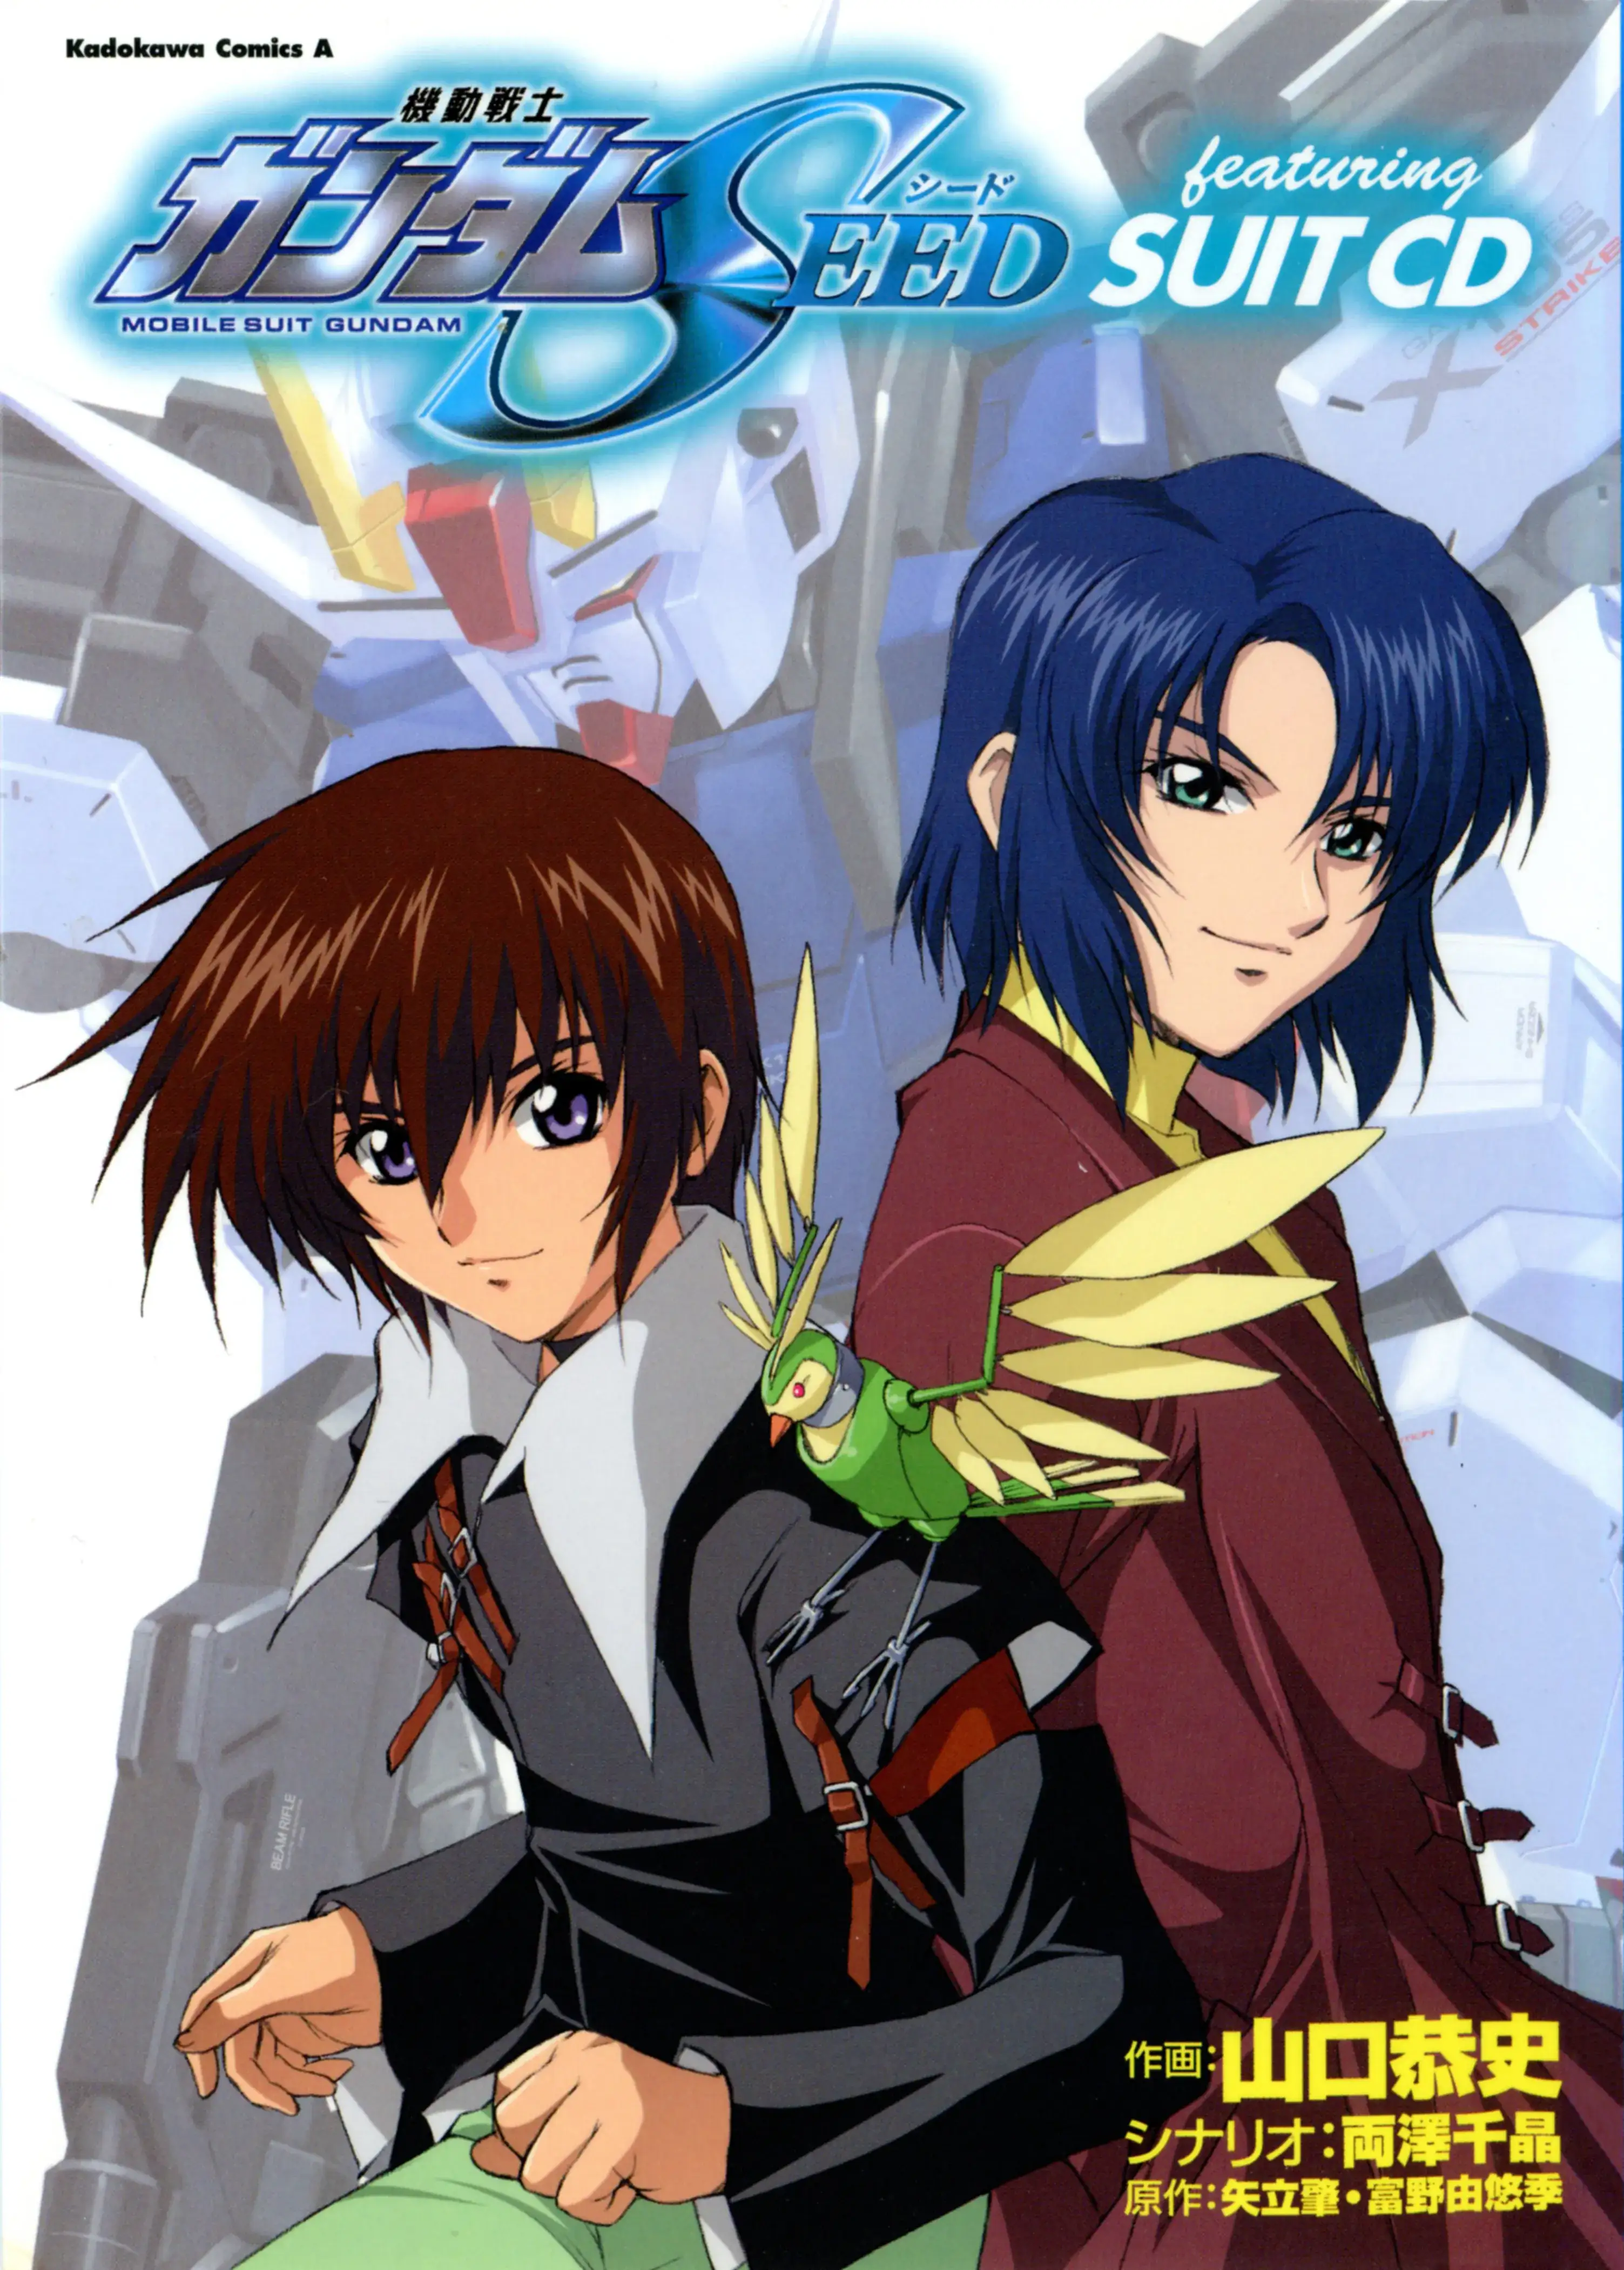 mobile-suit-gundam-seed-featuring-suit-cd